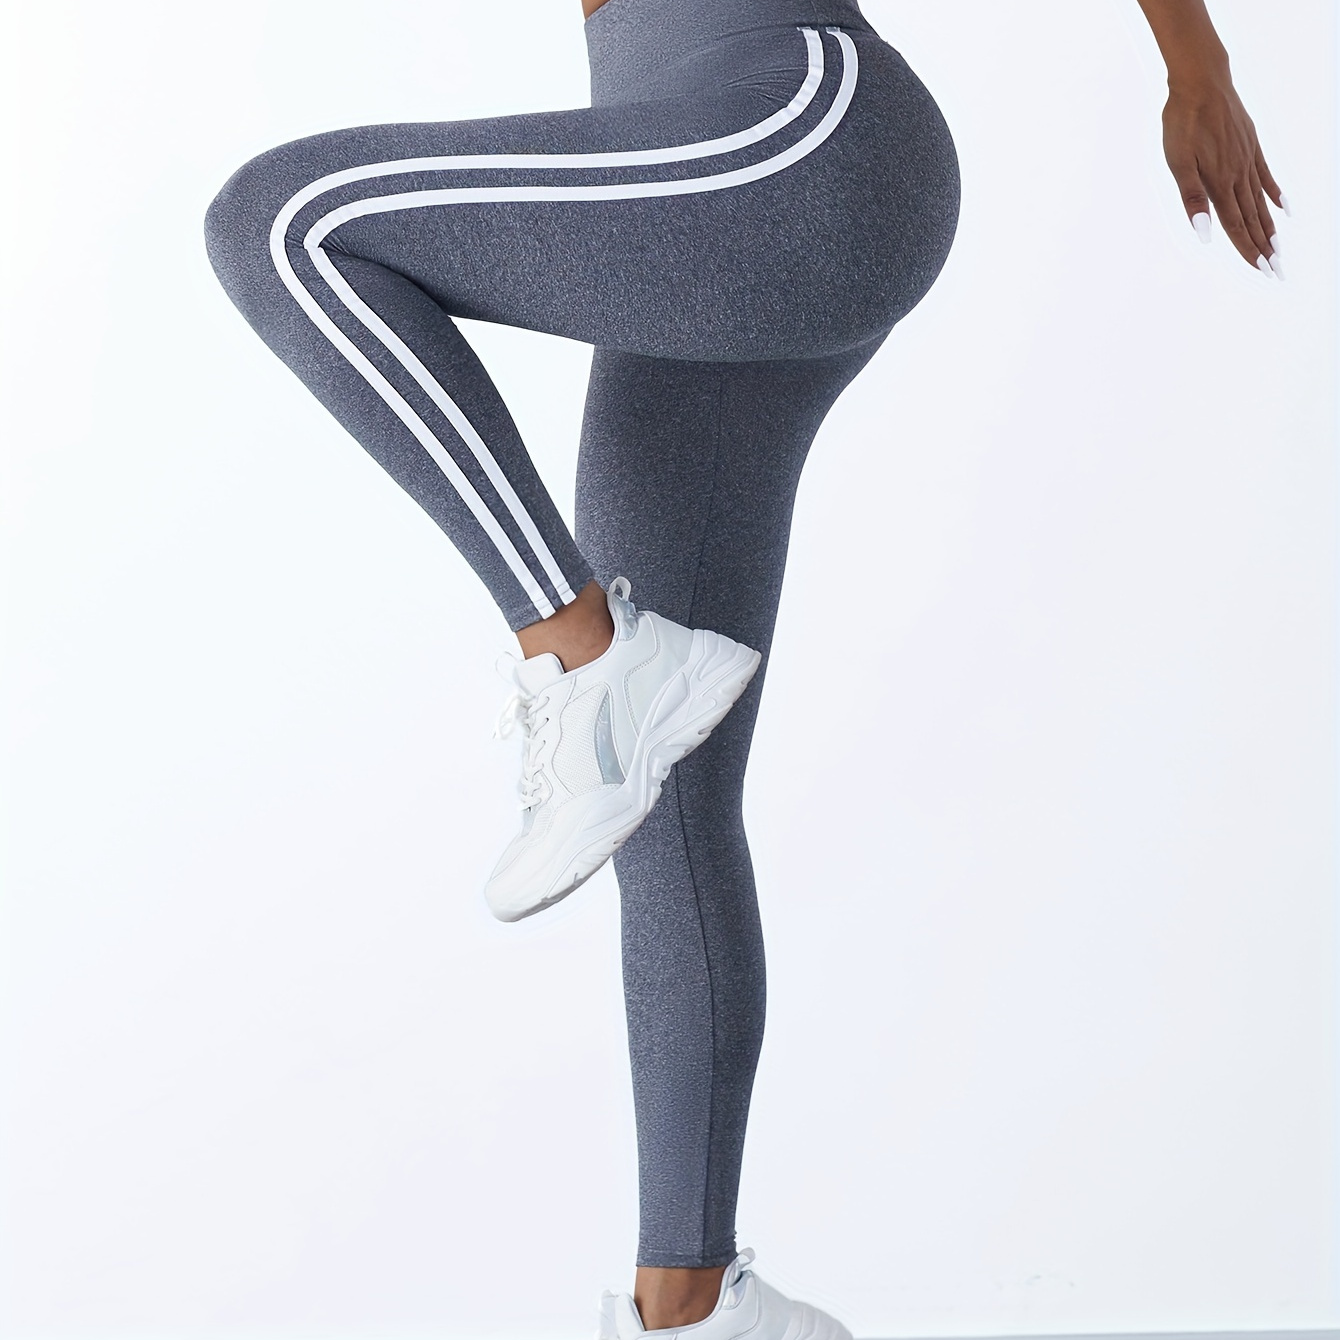 

Slim & Sculpt Your Butt With Solid Color Cropped Yoga Leggings - Sports Fitness, Running & High Stretchy Pants!